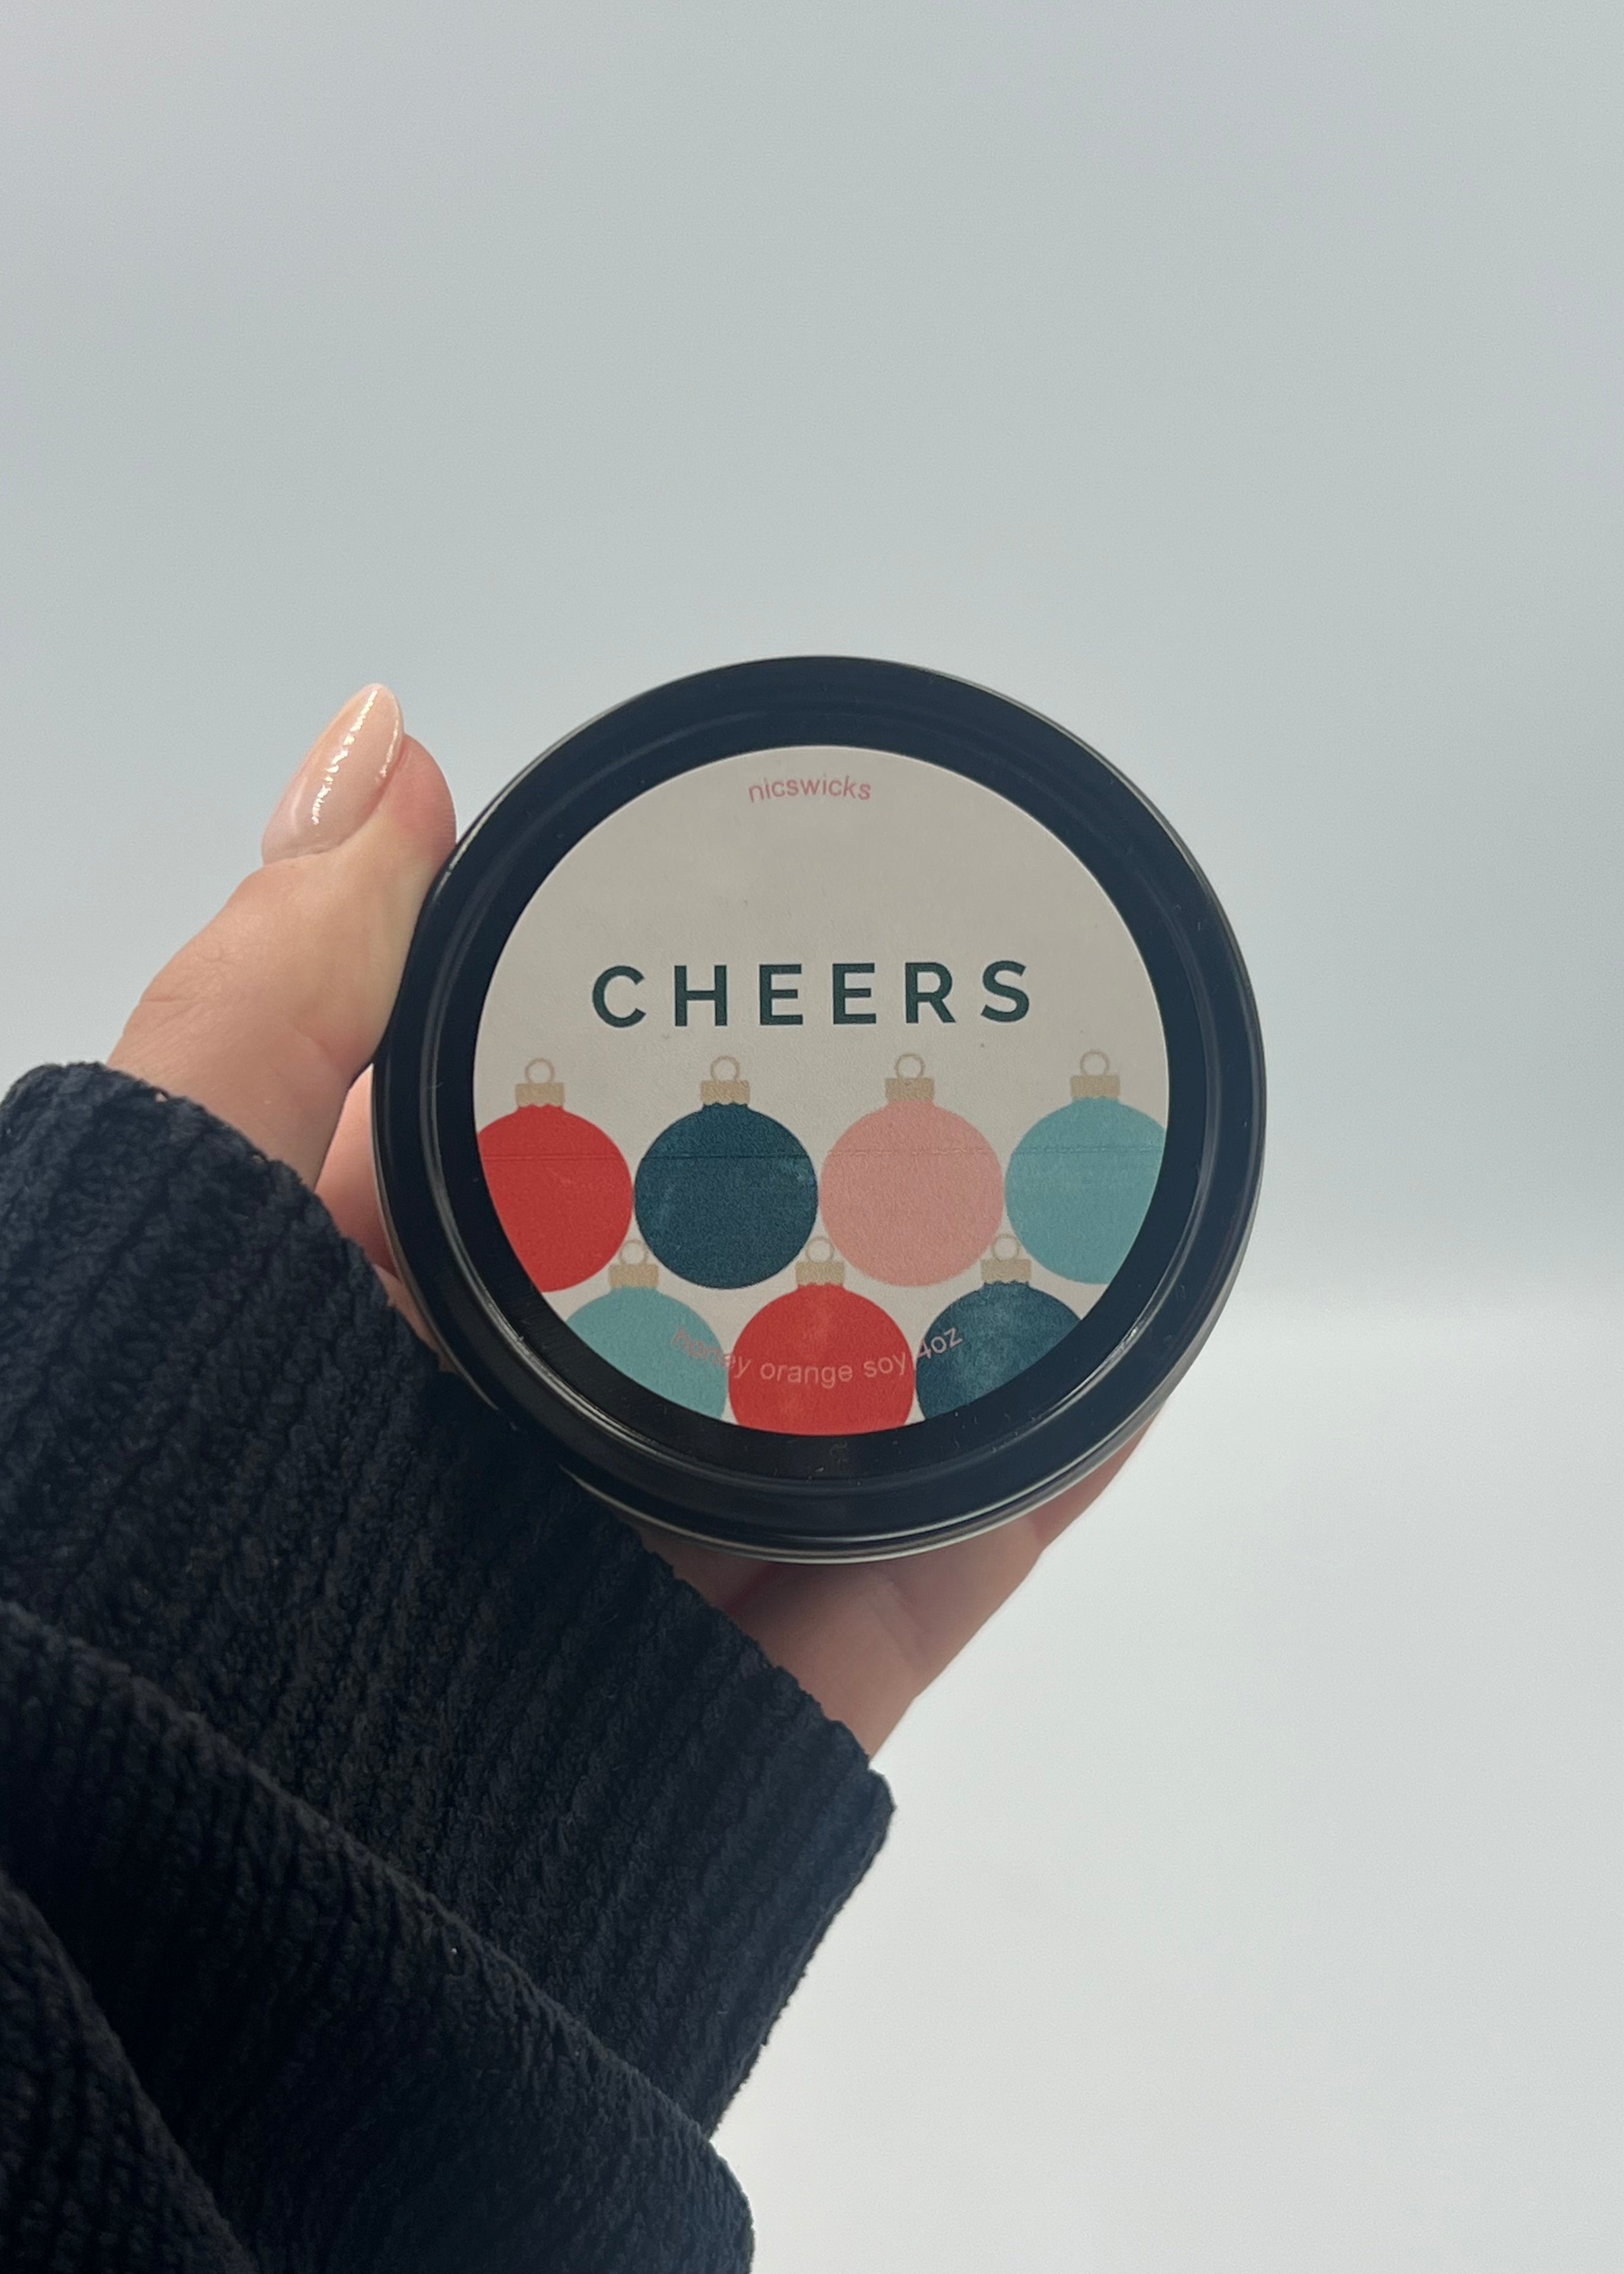 Candle - Cheers 4oz - 0